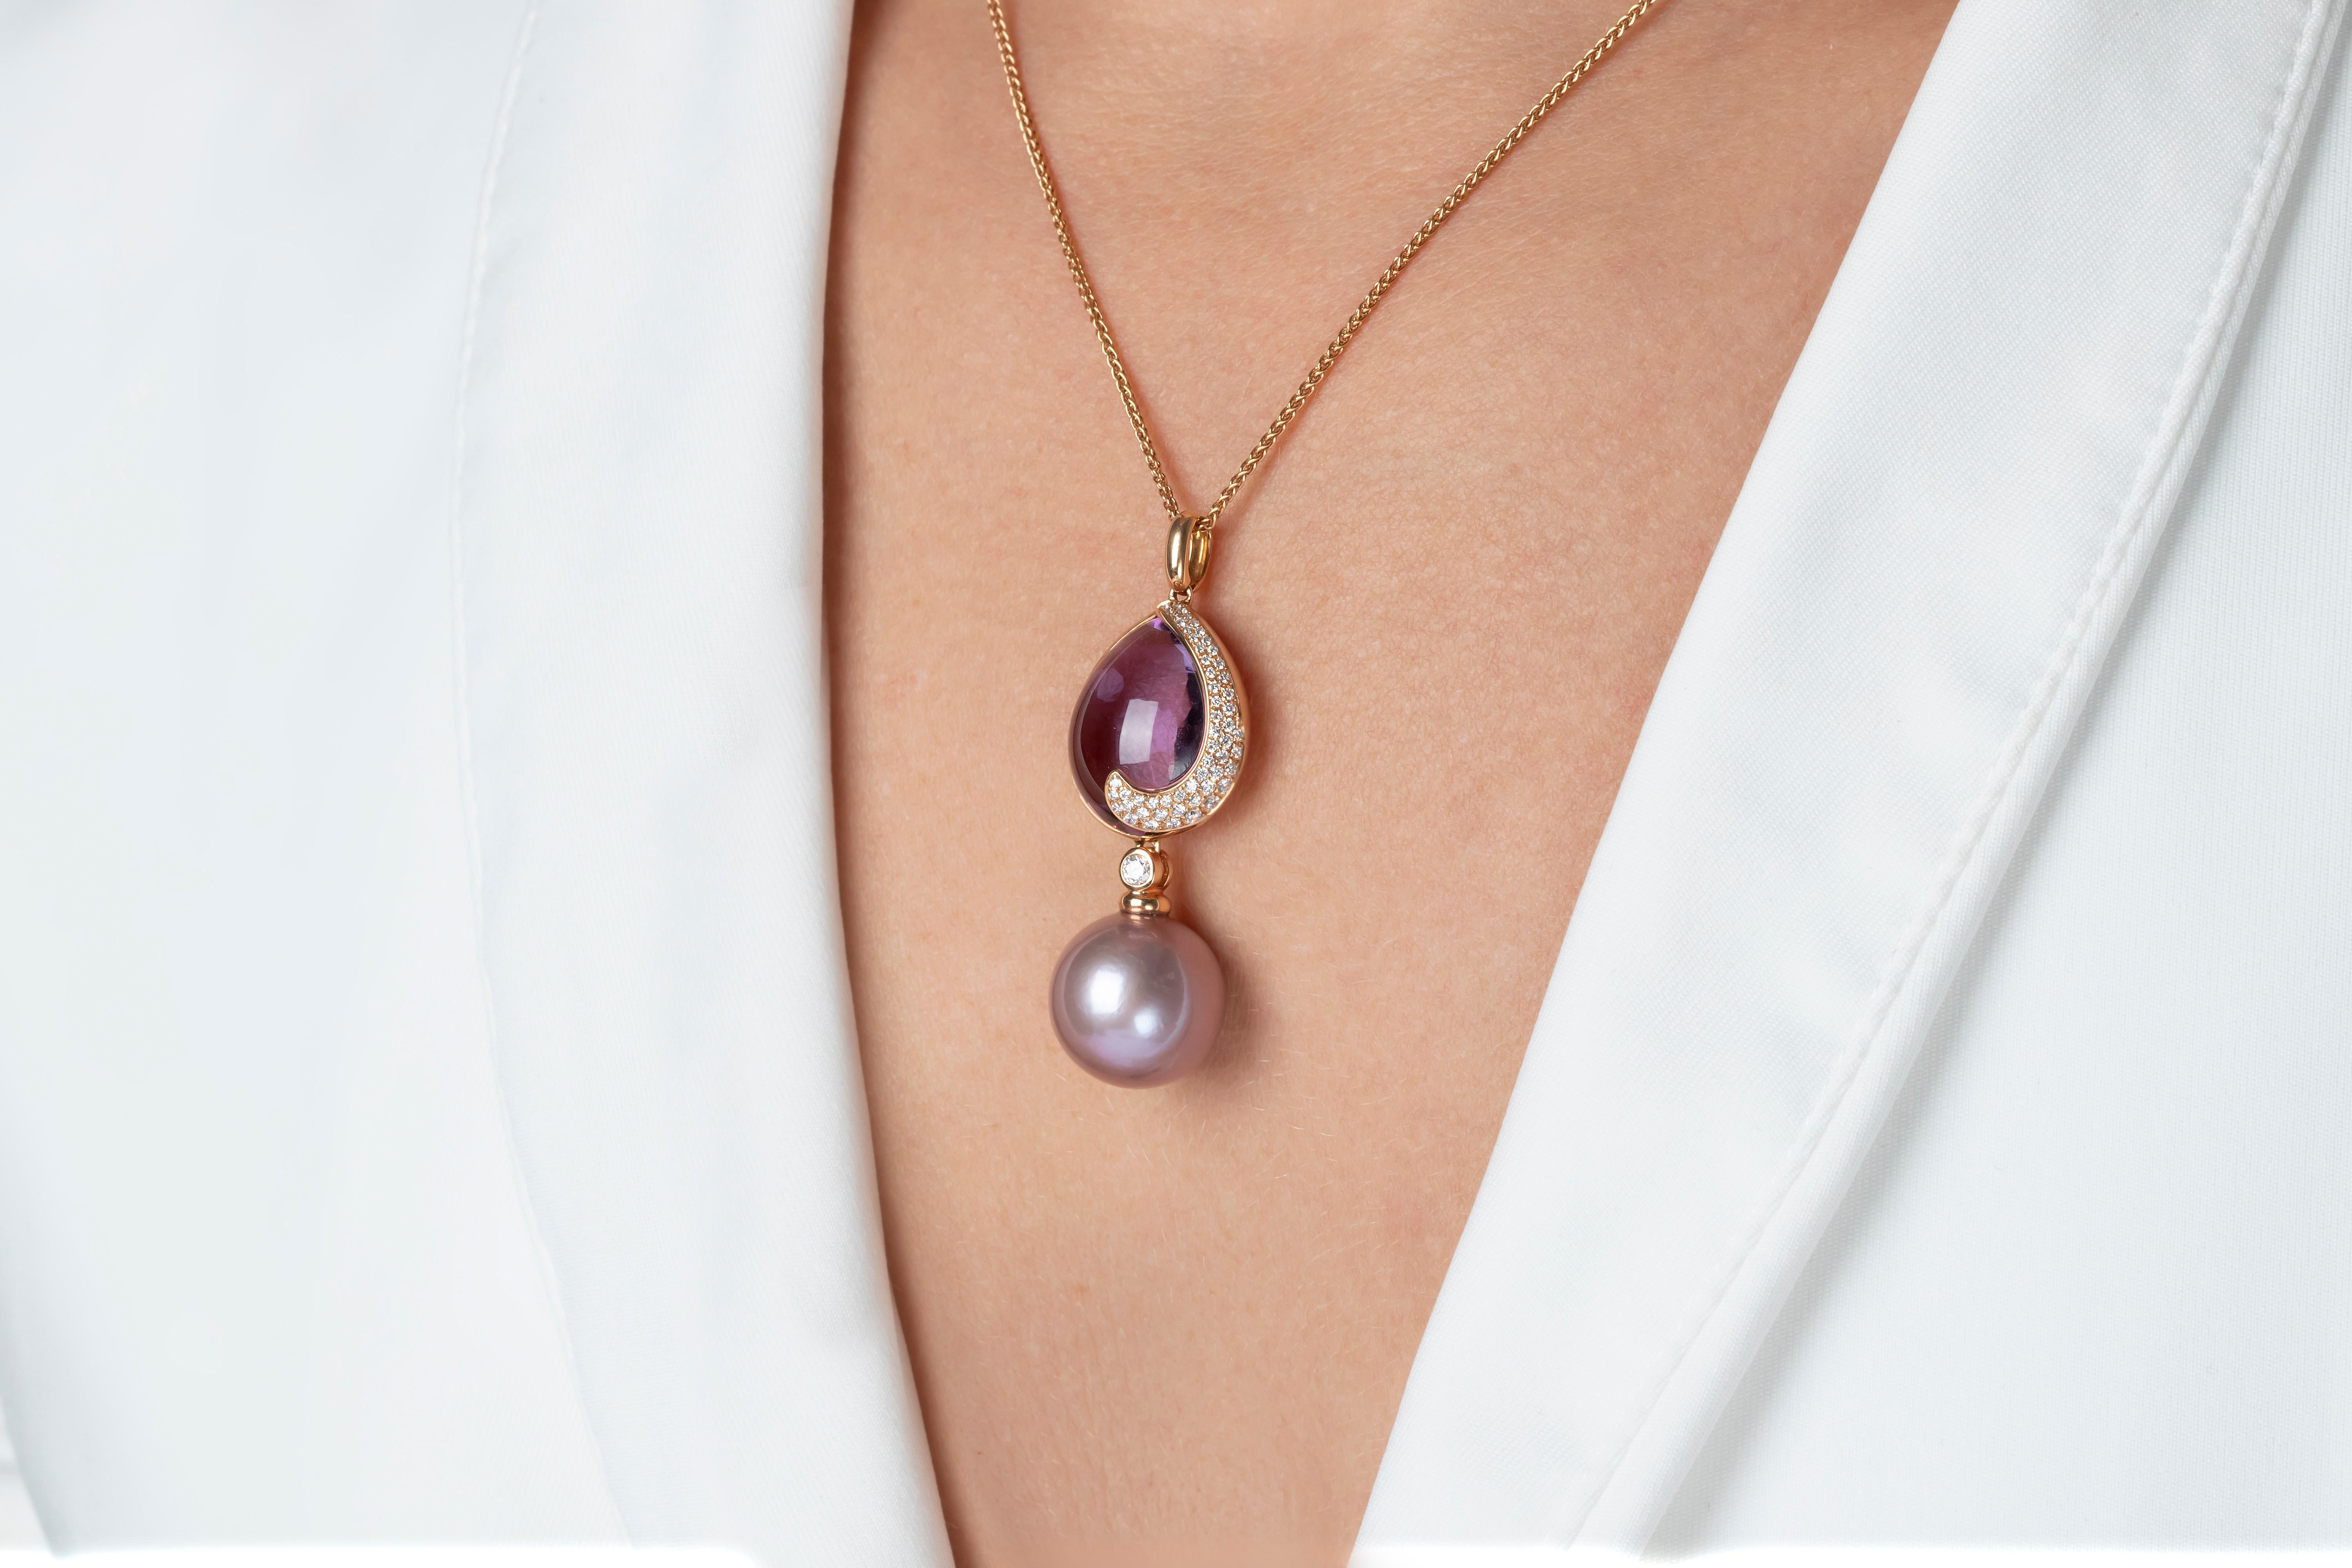 This bold pendant features a pretty amethyst cabochon in within a swirl of sparkling white diamonds, accentuated by a rare natural colour pink pearl. This delightful necklace will add a sumptuous pop of colour to any outfit it is combined